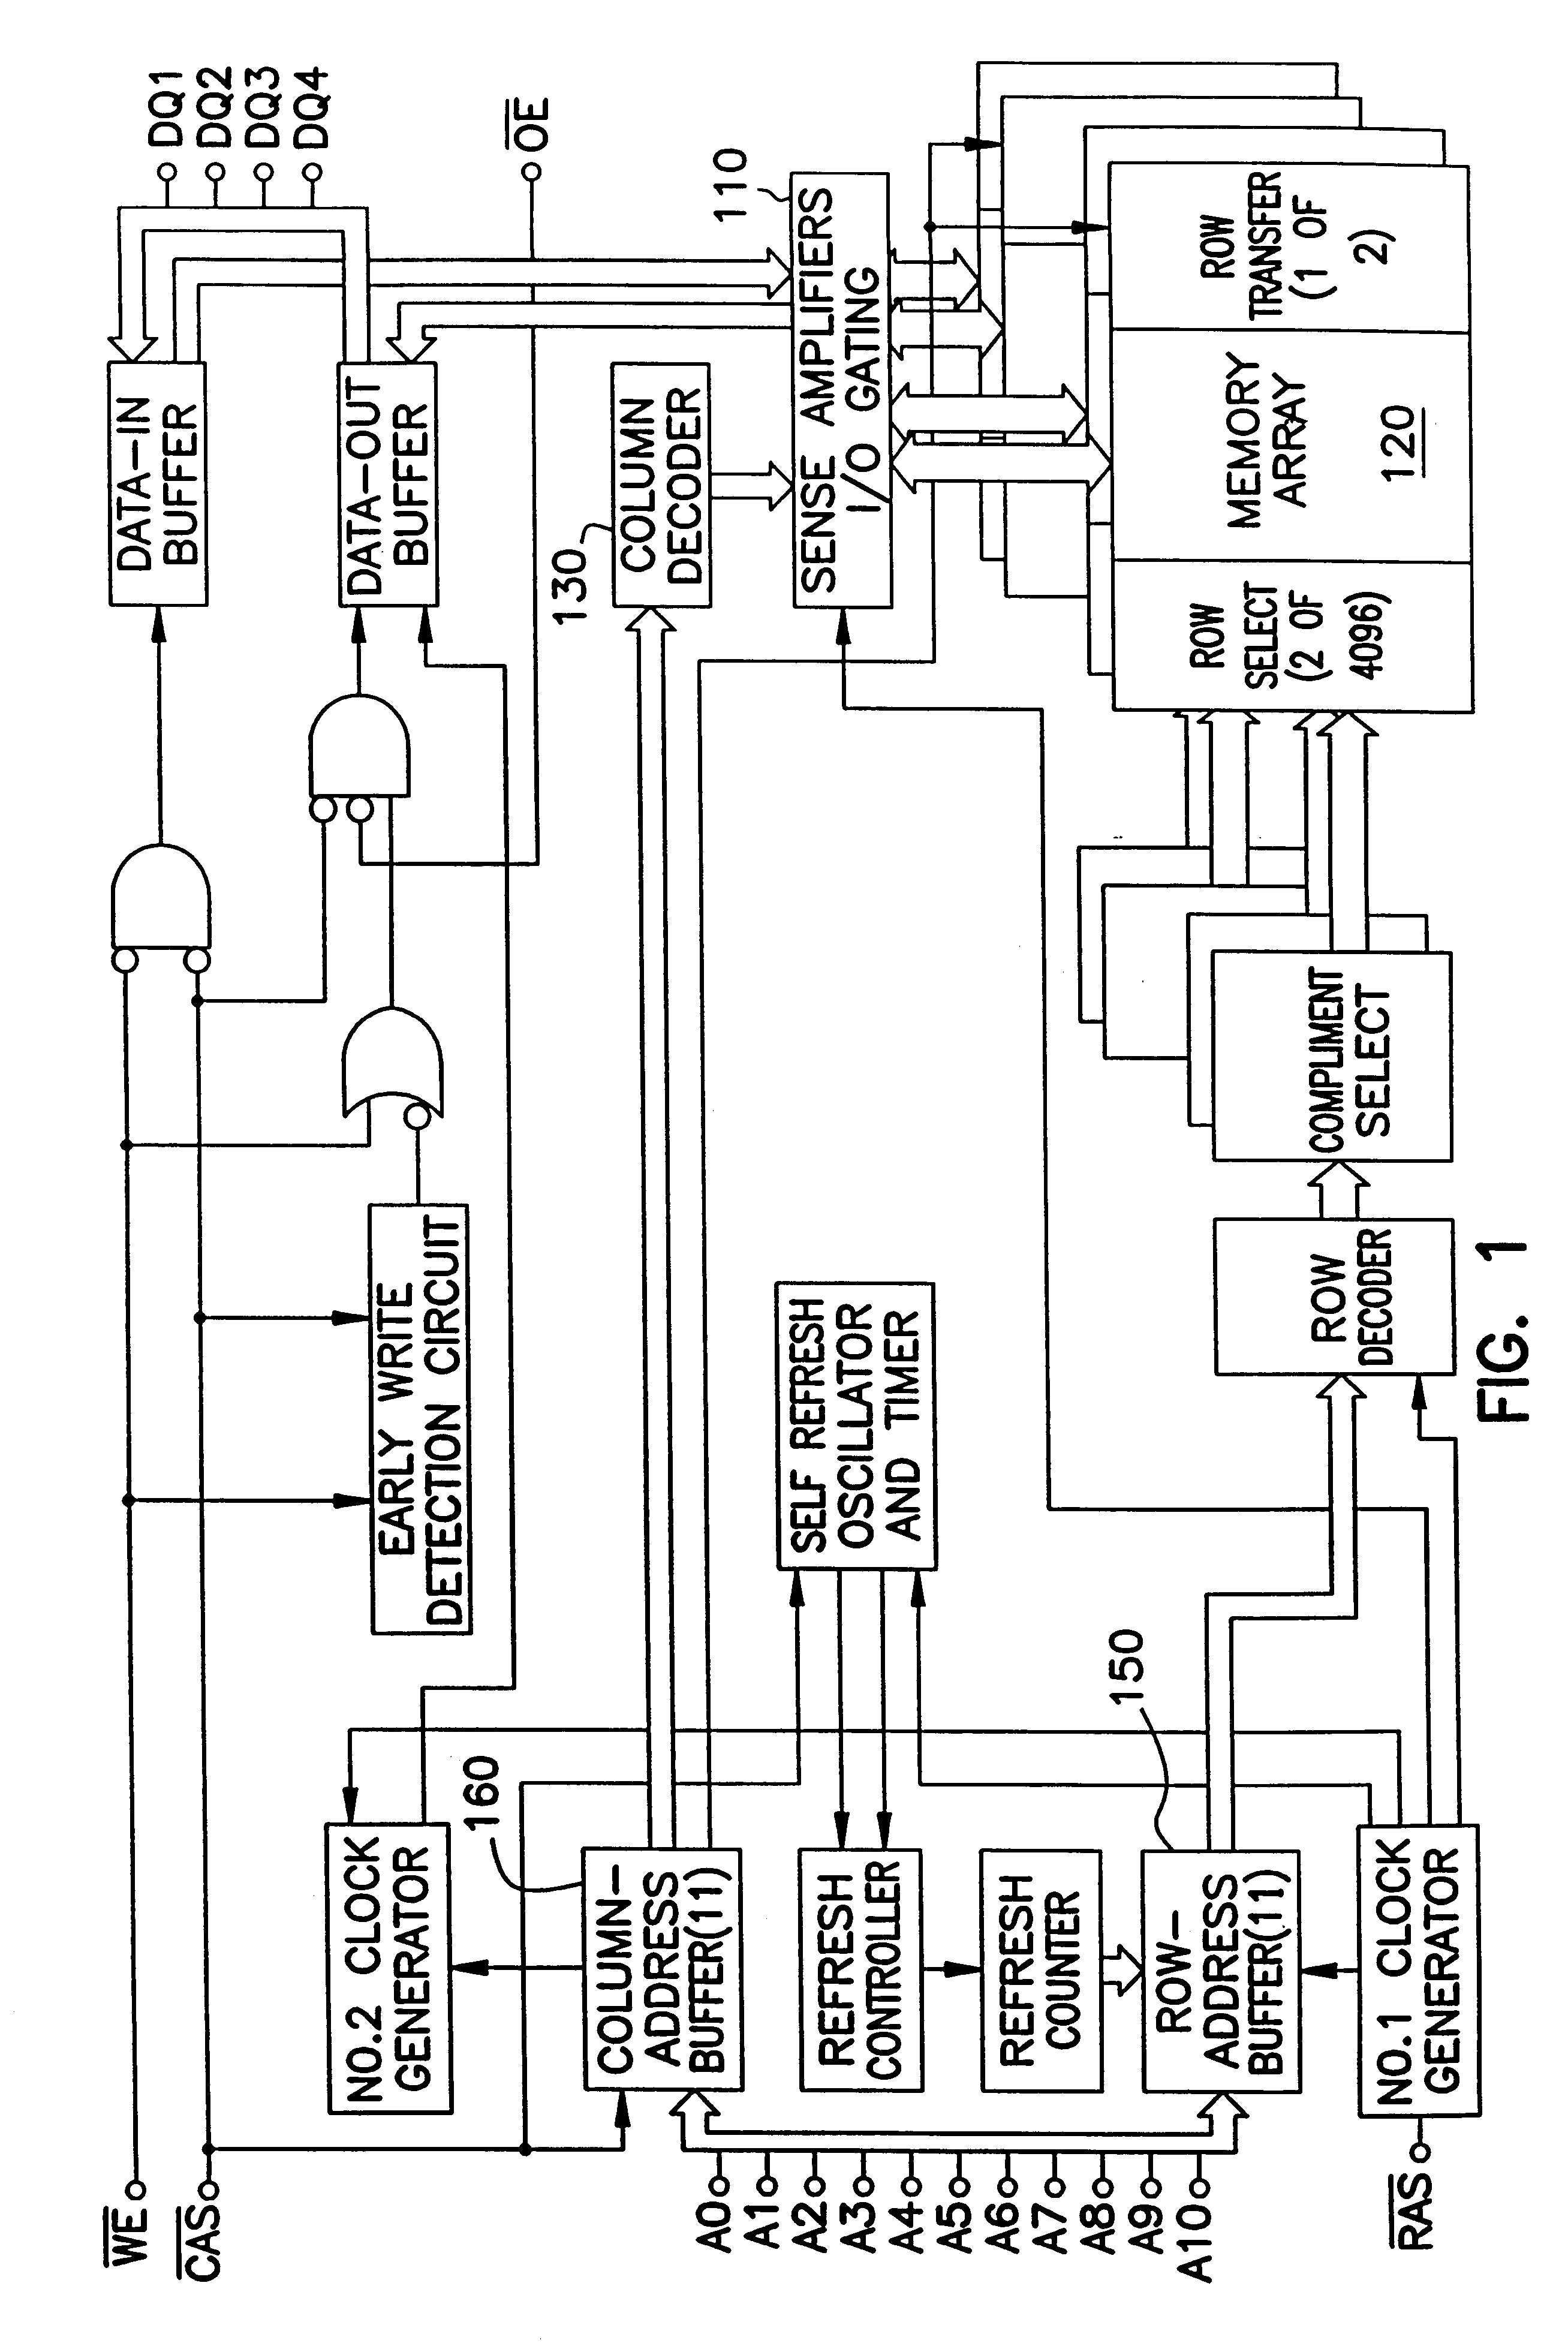 System for improved memory cell access